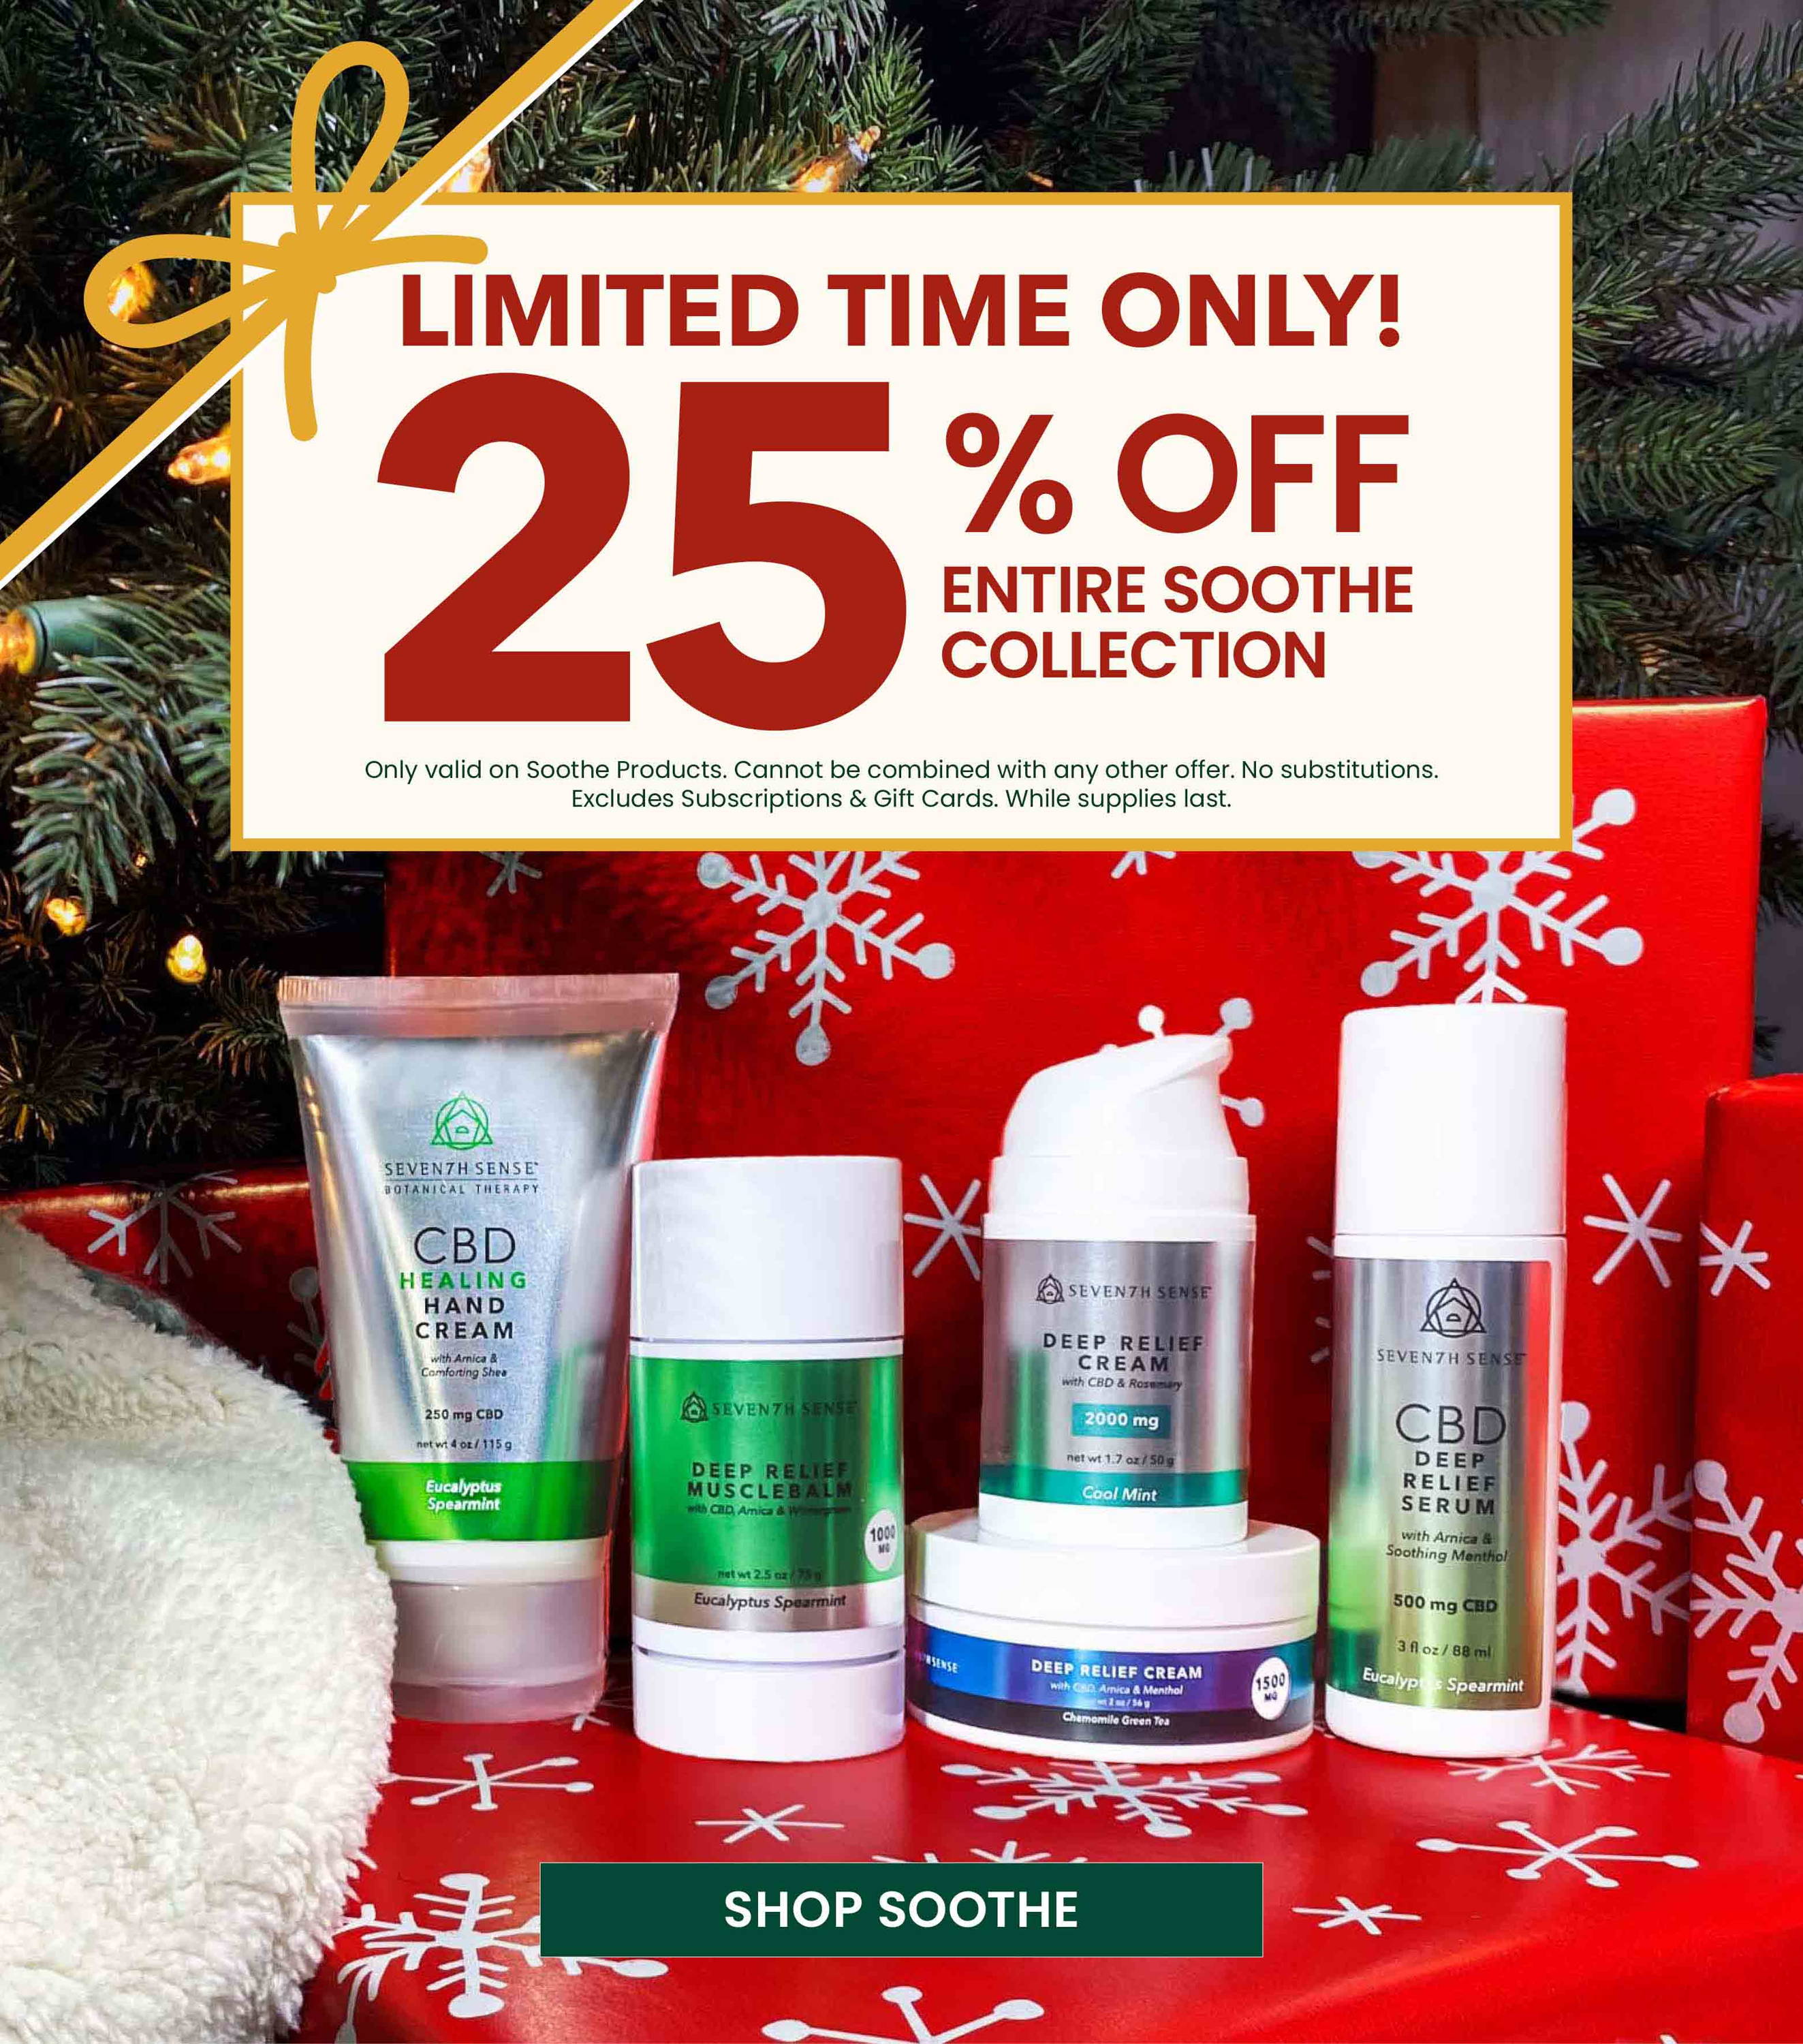 25% Off Entire Soothe Collection